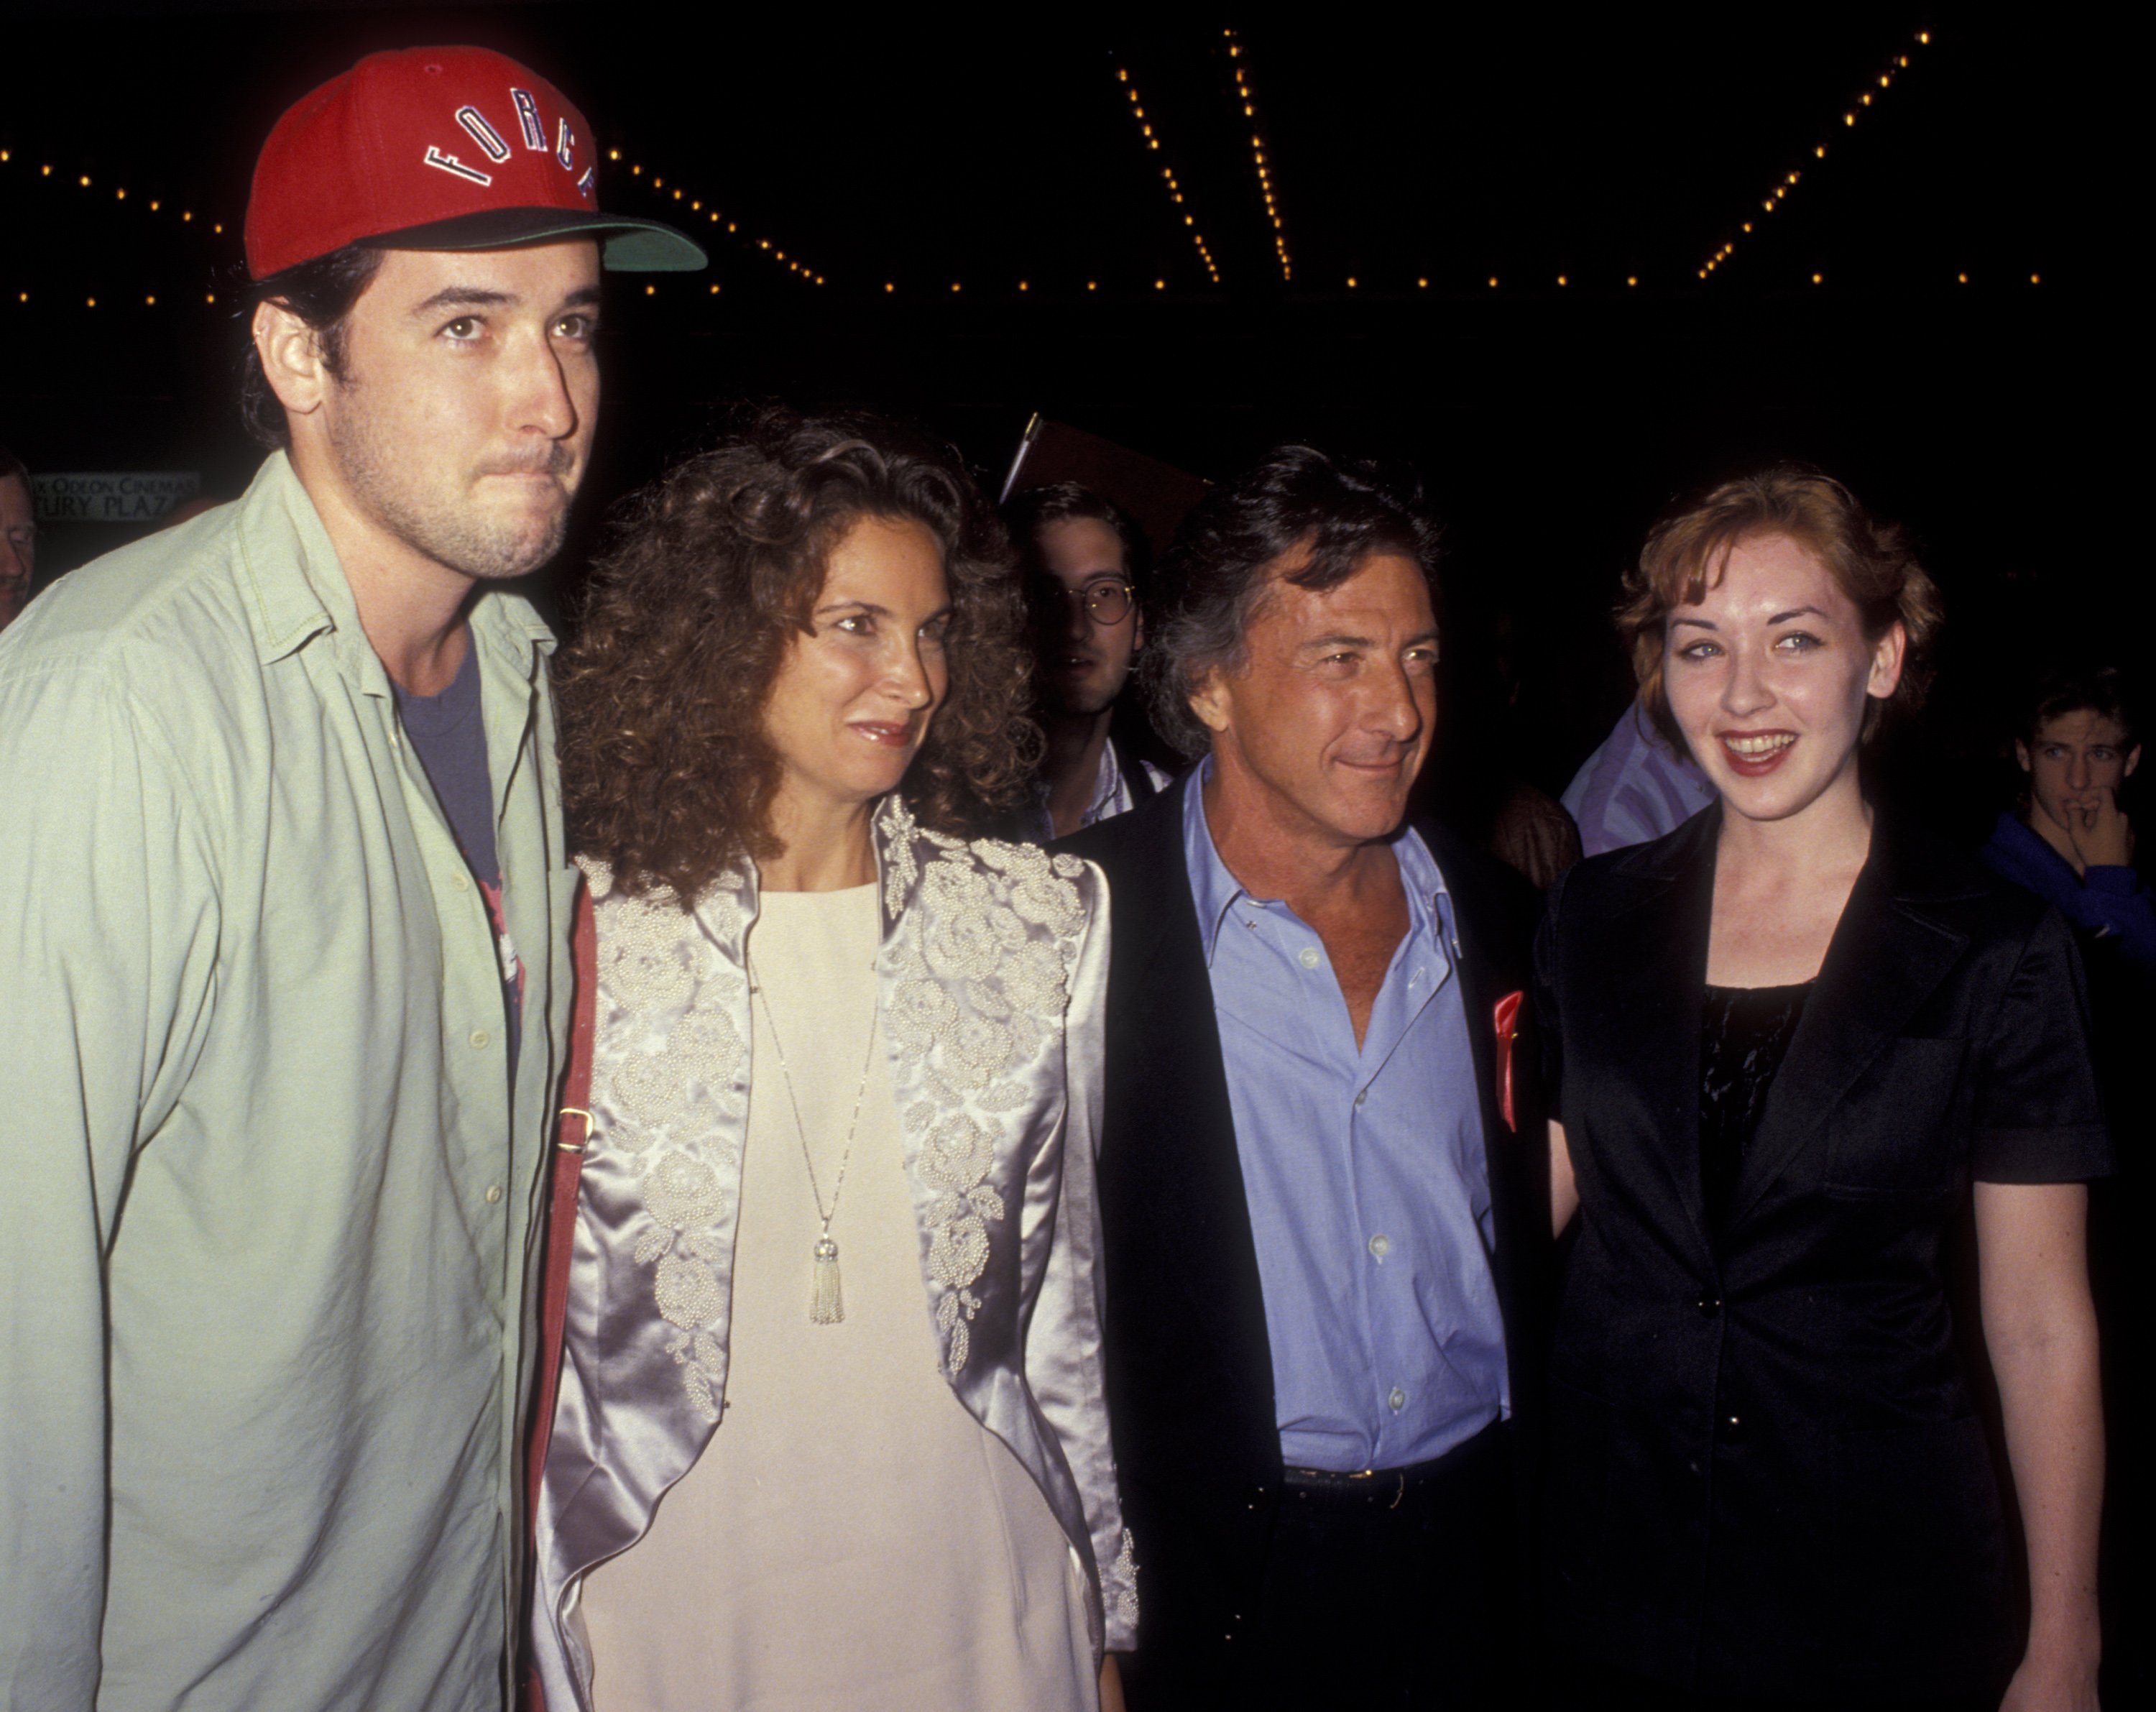 John Cusack, Dustin Hoffman, Lisa Hoffman and Susie Cusack at the world premiere of "Hero" in Century City, California in 1992. | Source: Getty Images.